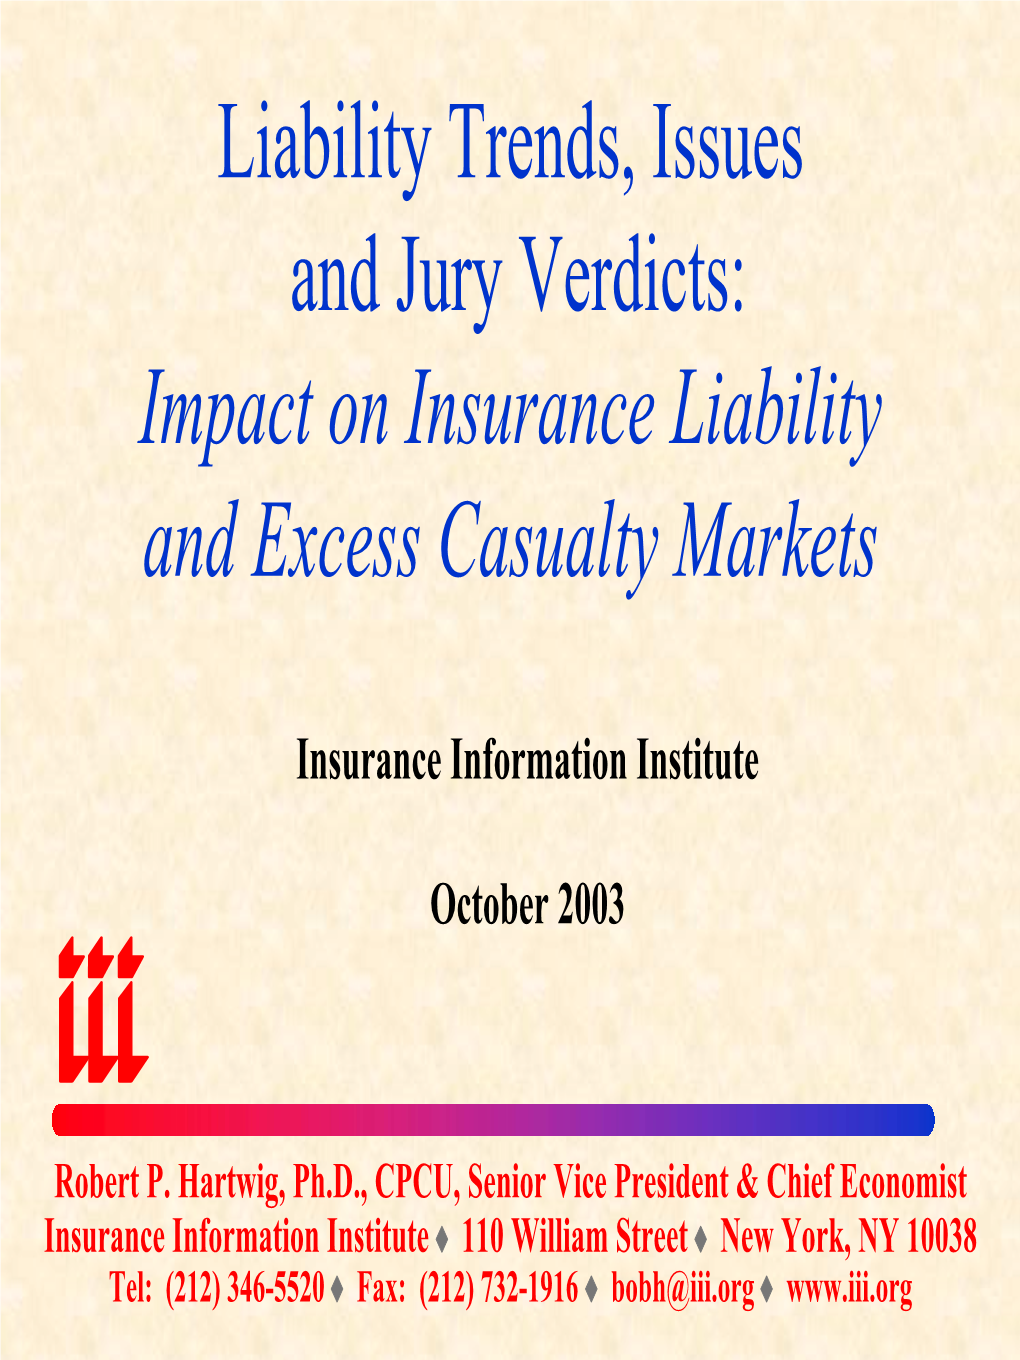 Liability Trends, Issues and Jury Verdicts: Impact on Insurance Liability and Excess Casualty Markets